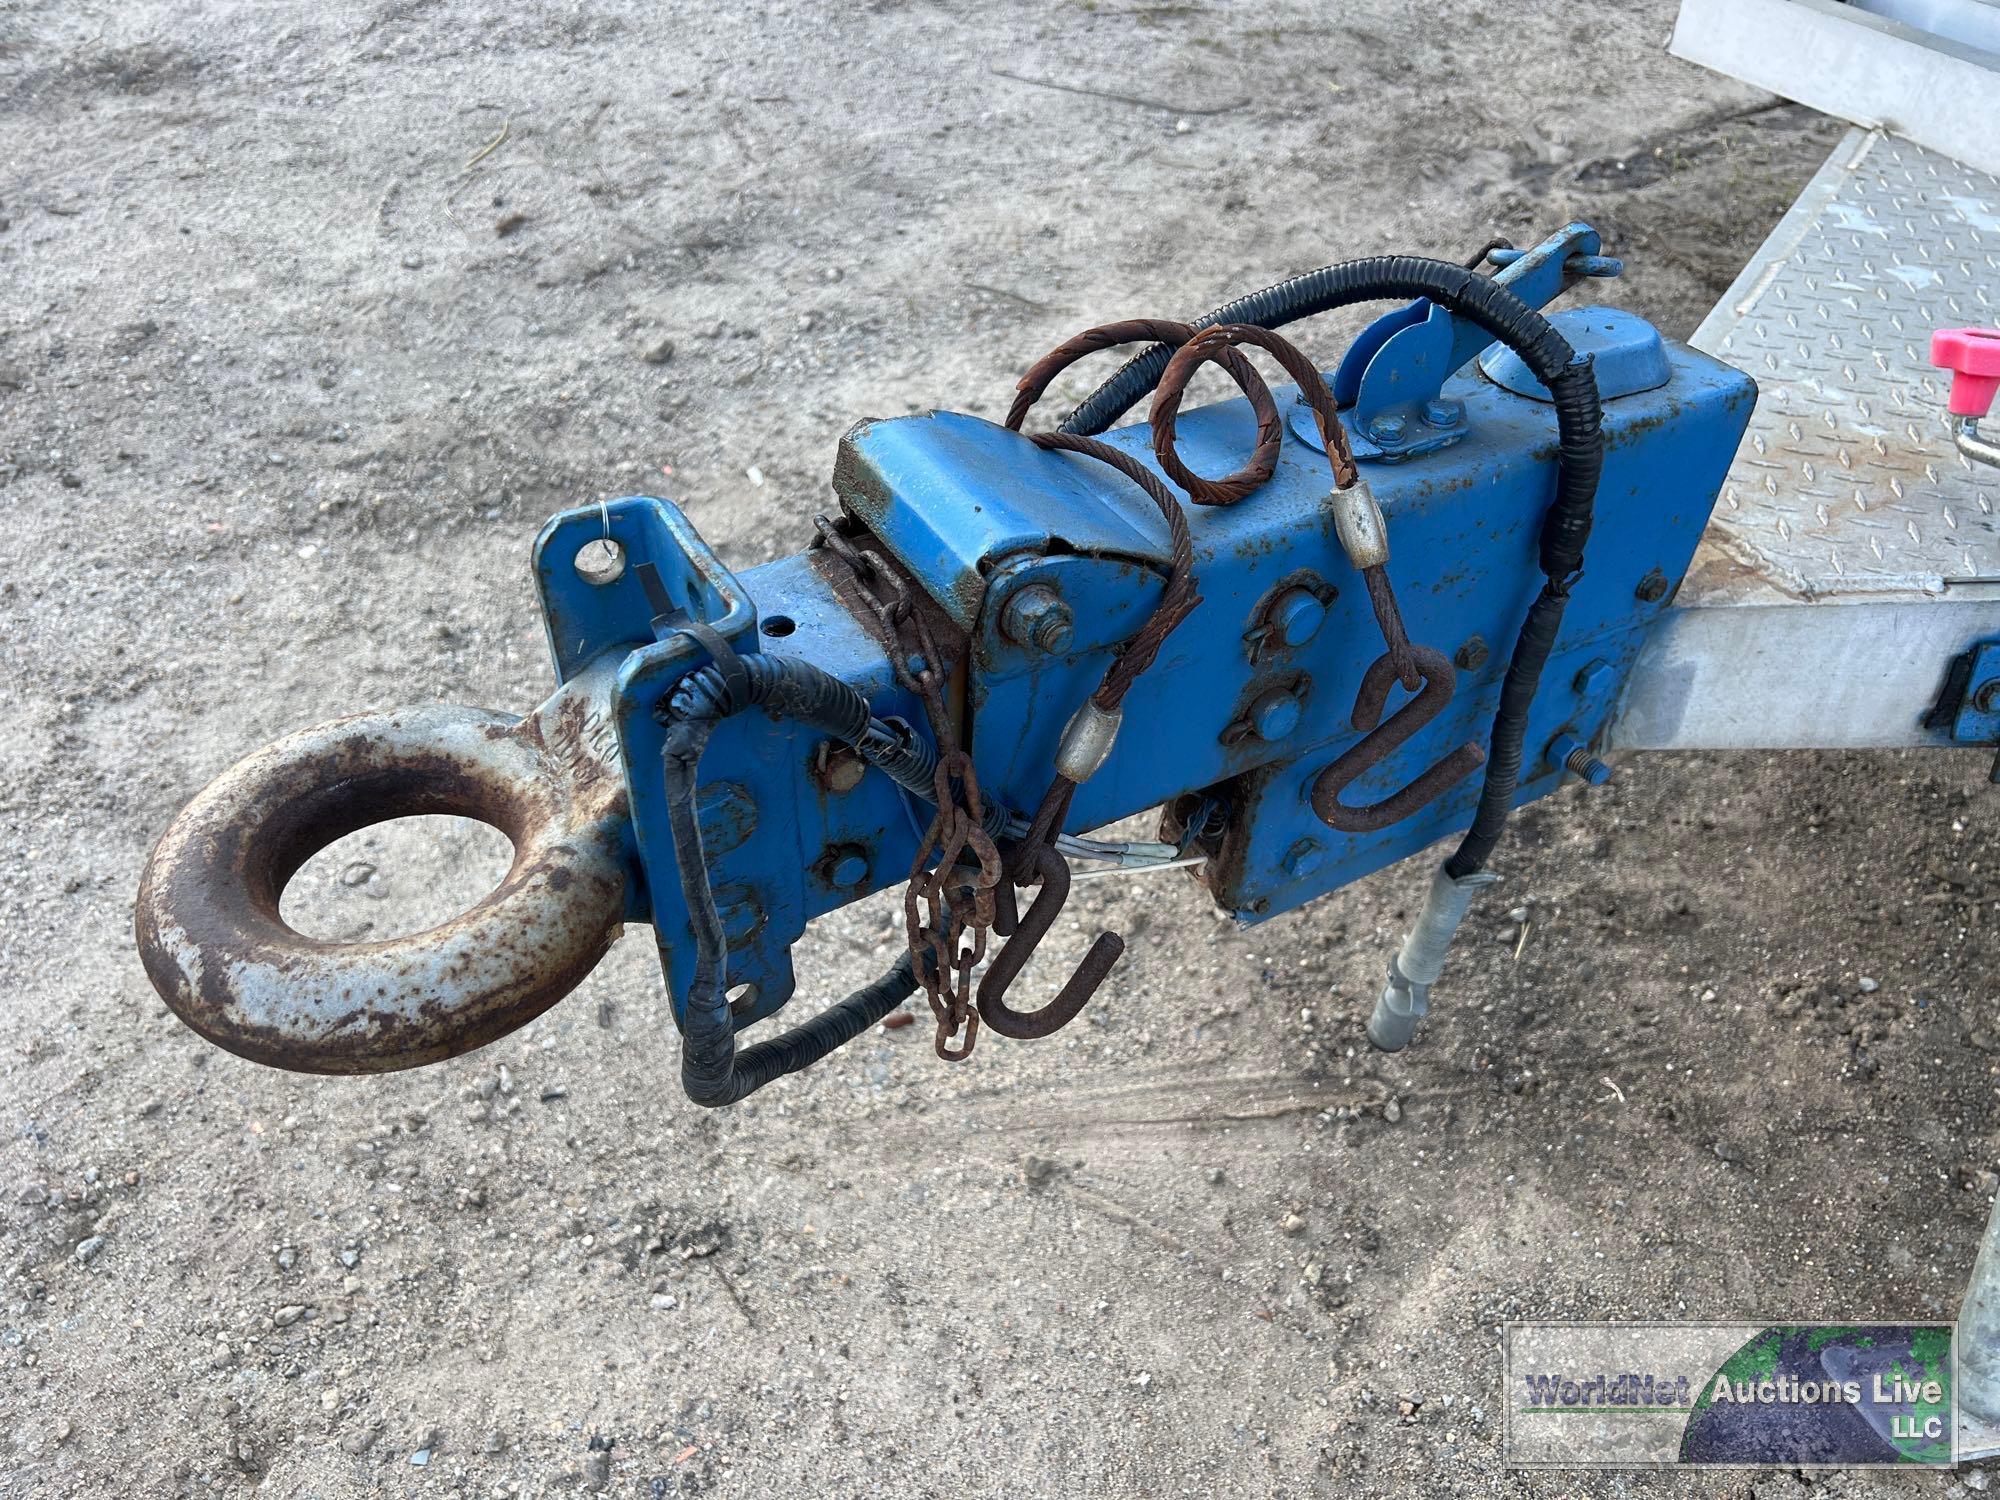 GORMAN-RUPP T8A20-B SELF PRIMING PUMP TRAILER SN-1073621 **NO TITLE, INVOICE ONLY**